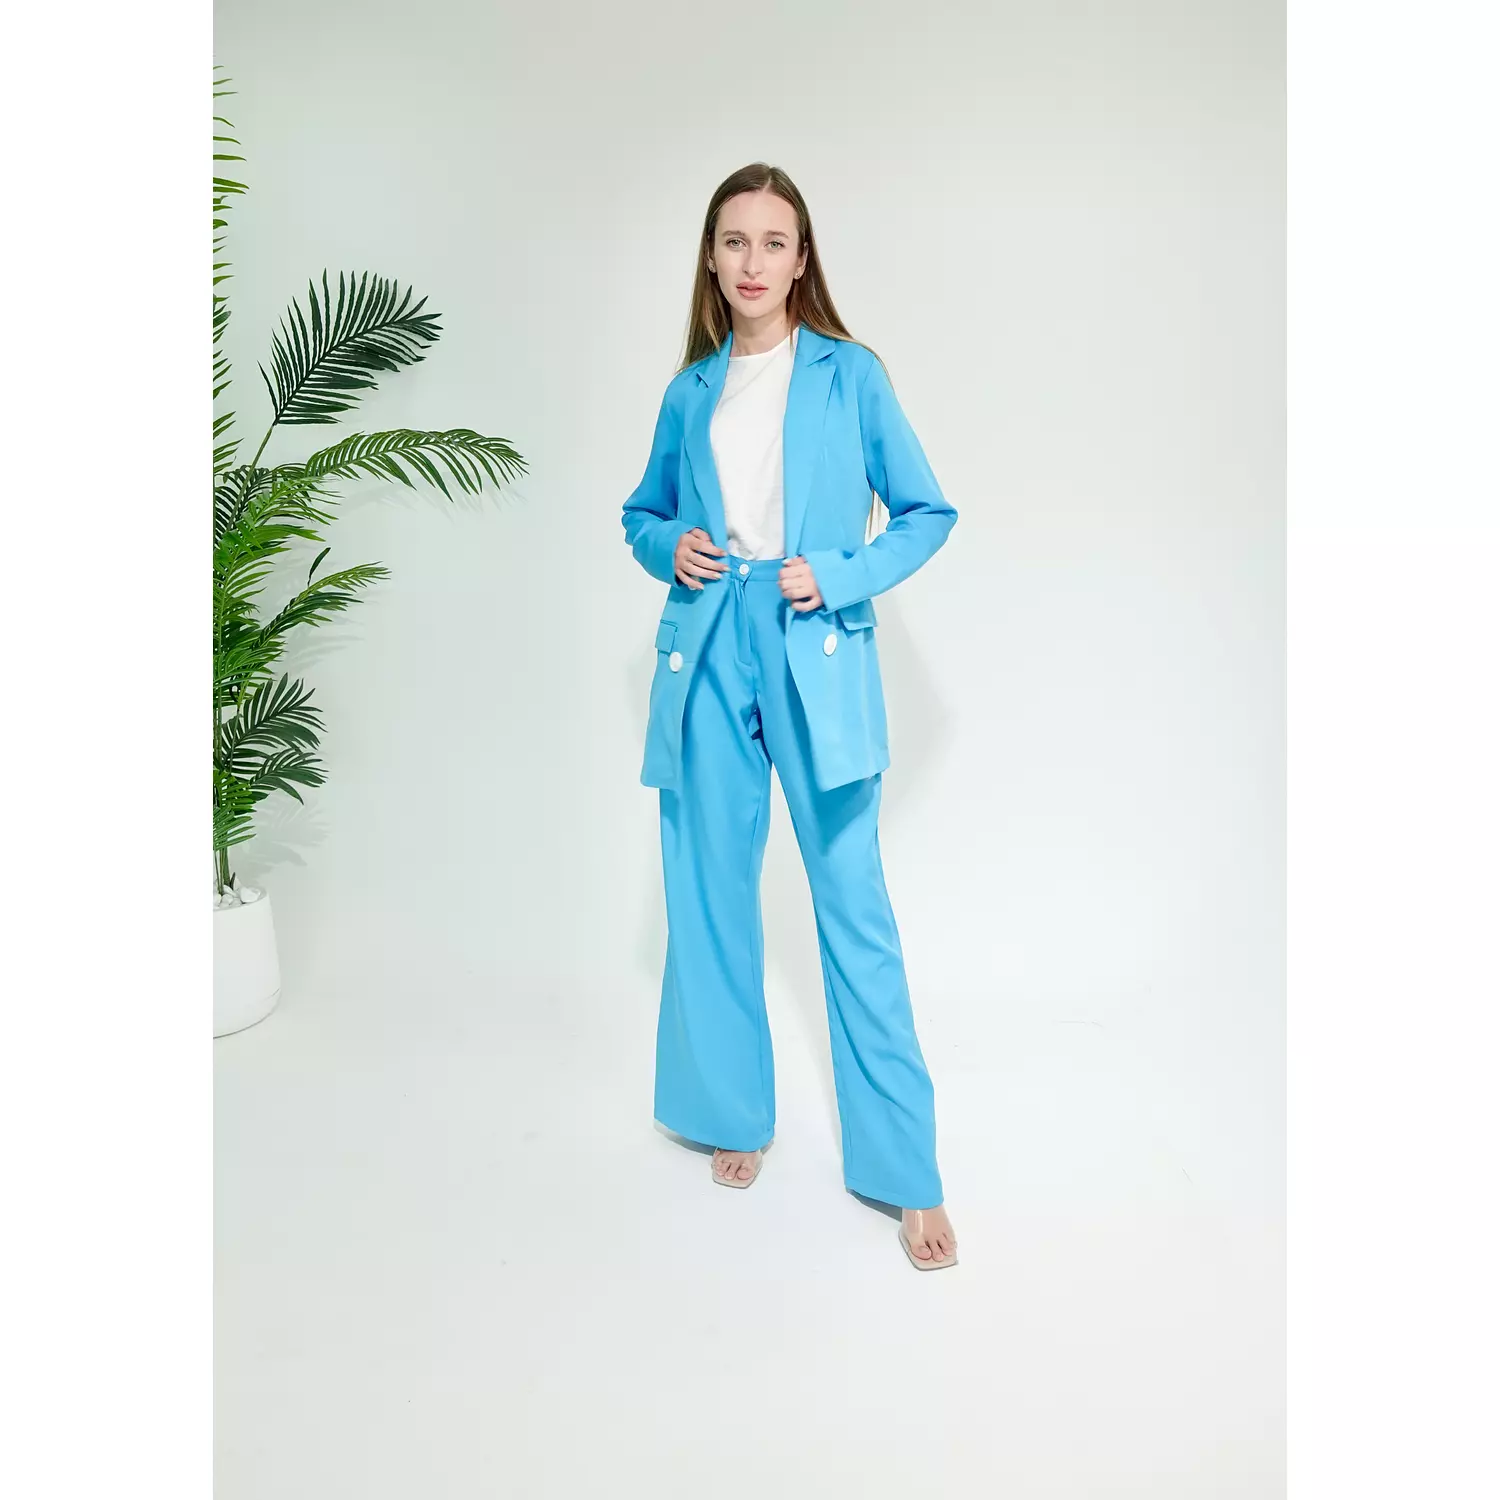 TURQUOISE SUIT 7